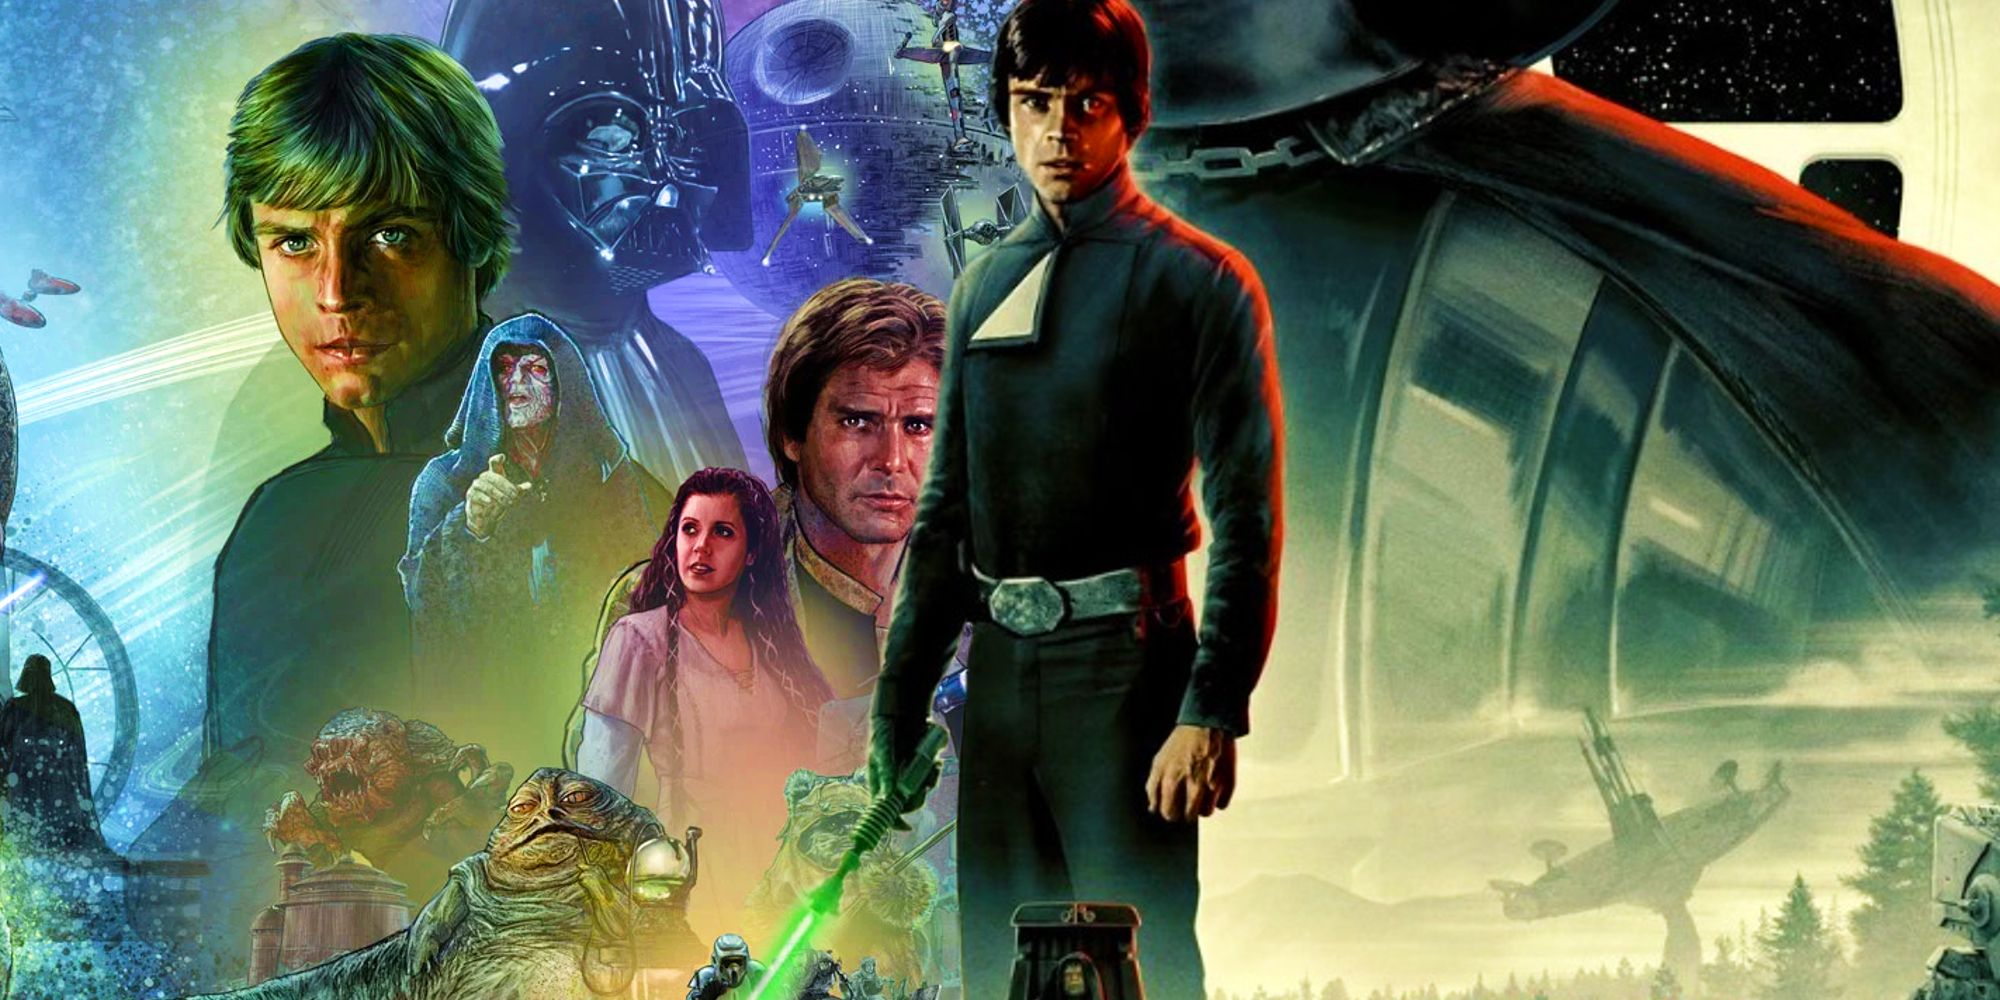 Return of the Jedi's 40th Anniversary poster next to a Star Wars Mural